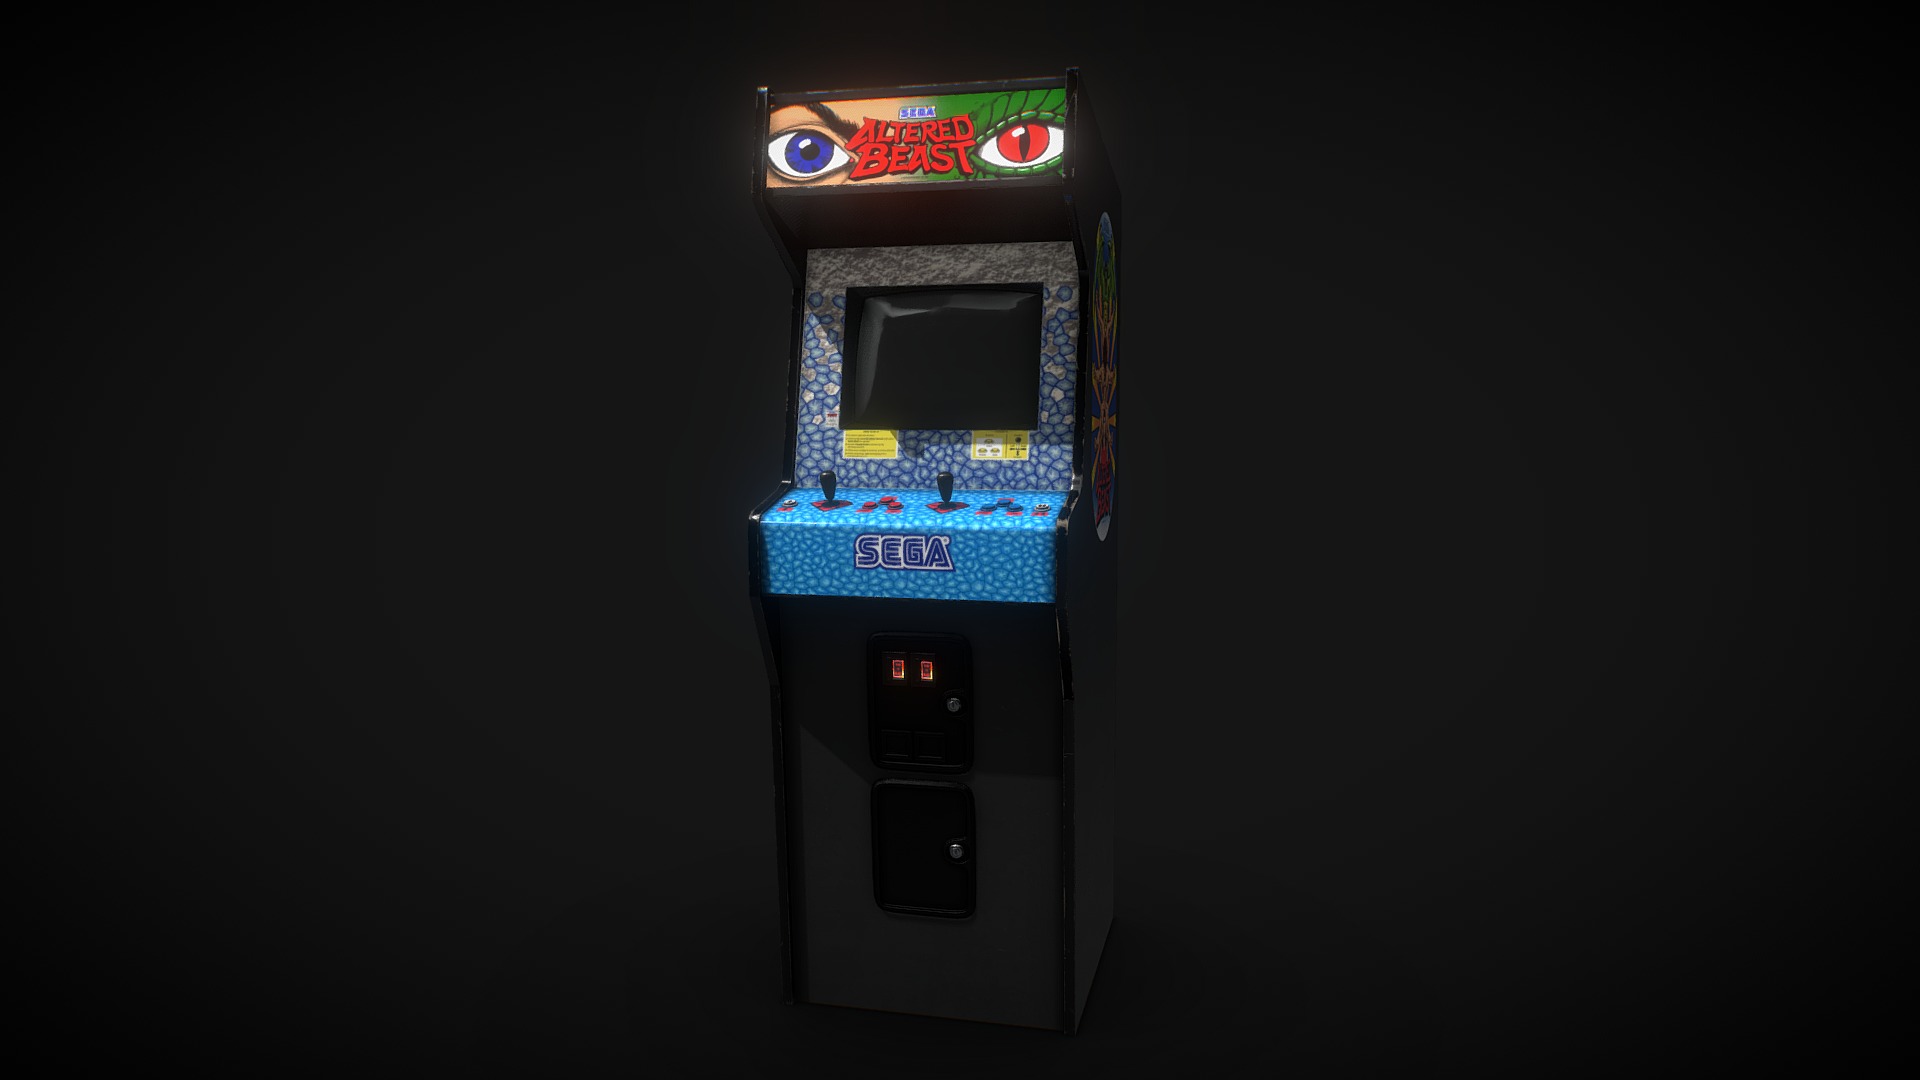 3D model Altered Beast - This is a 3D model of the Altered Beast. The 3D model is about a machine with a screen.